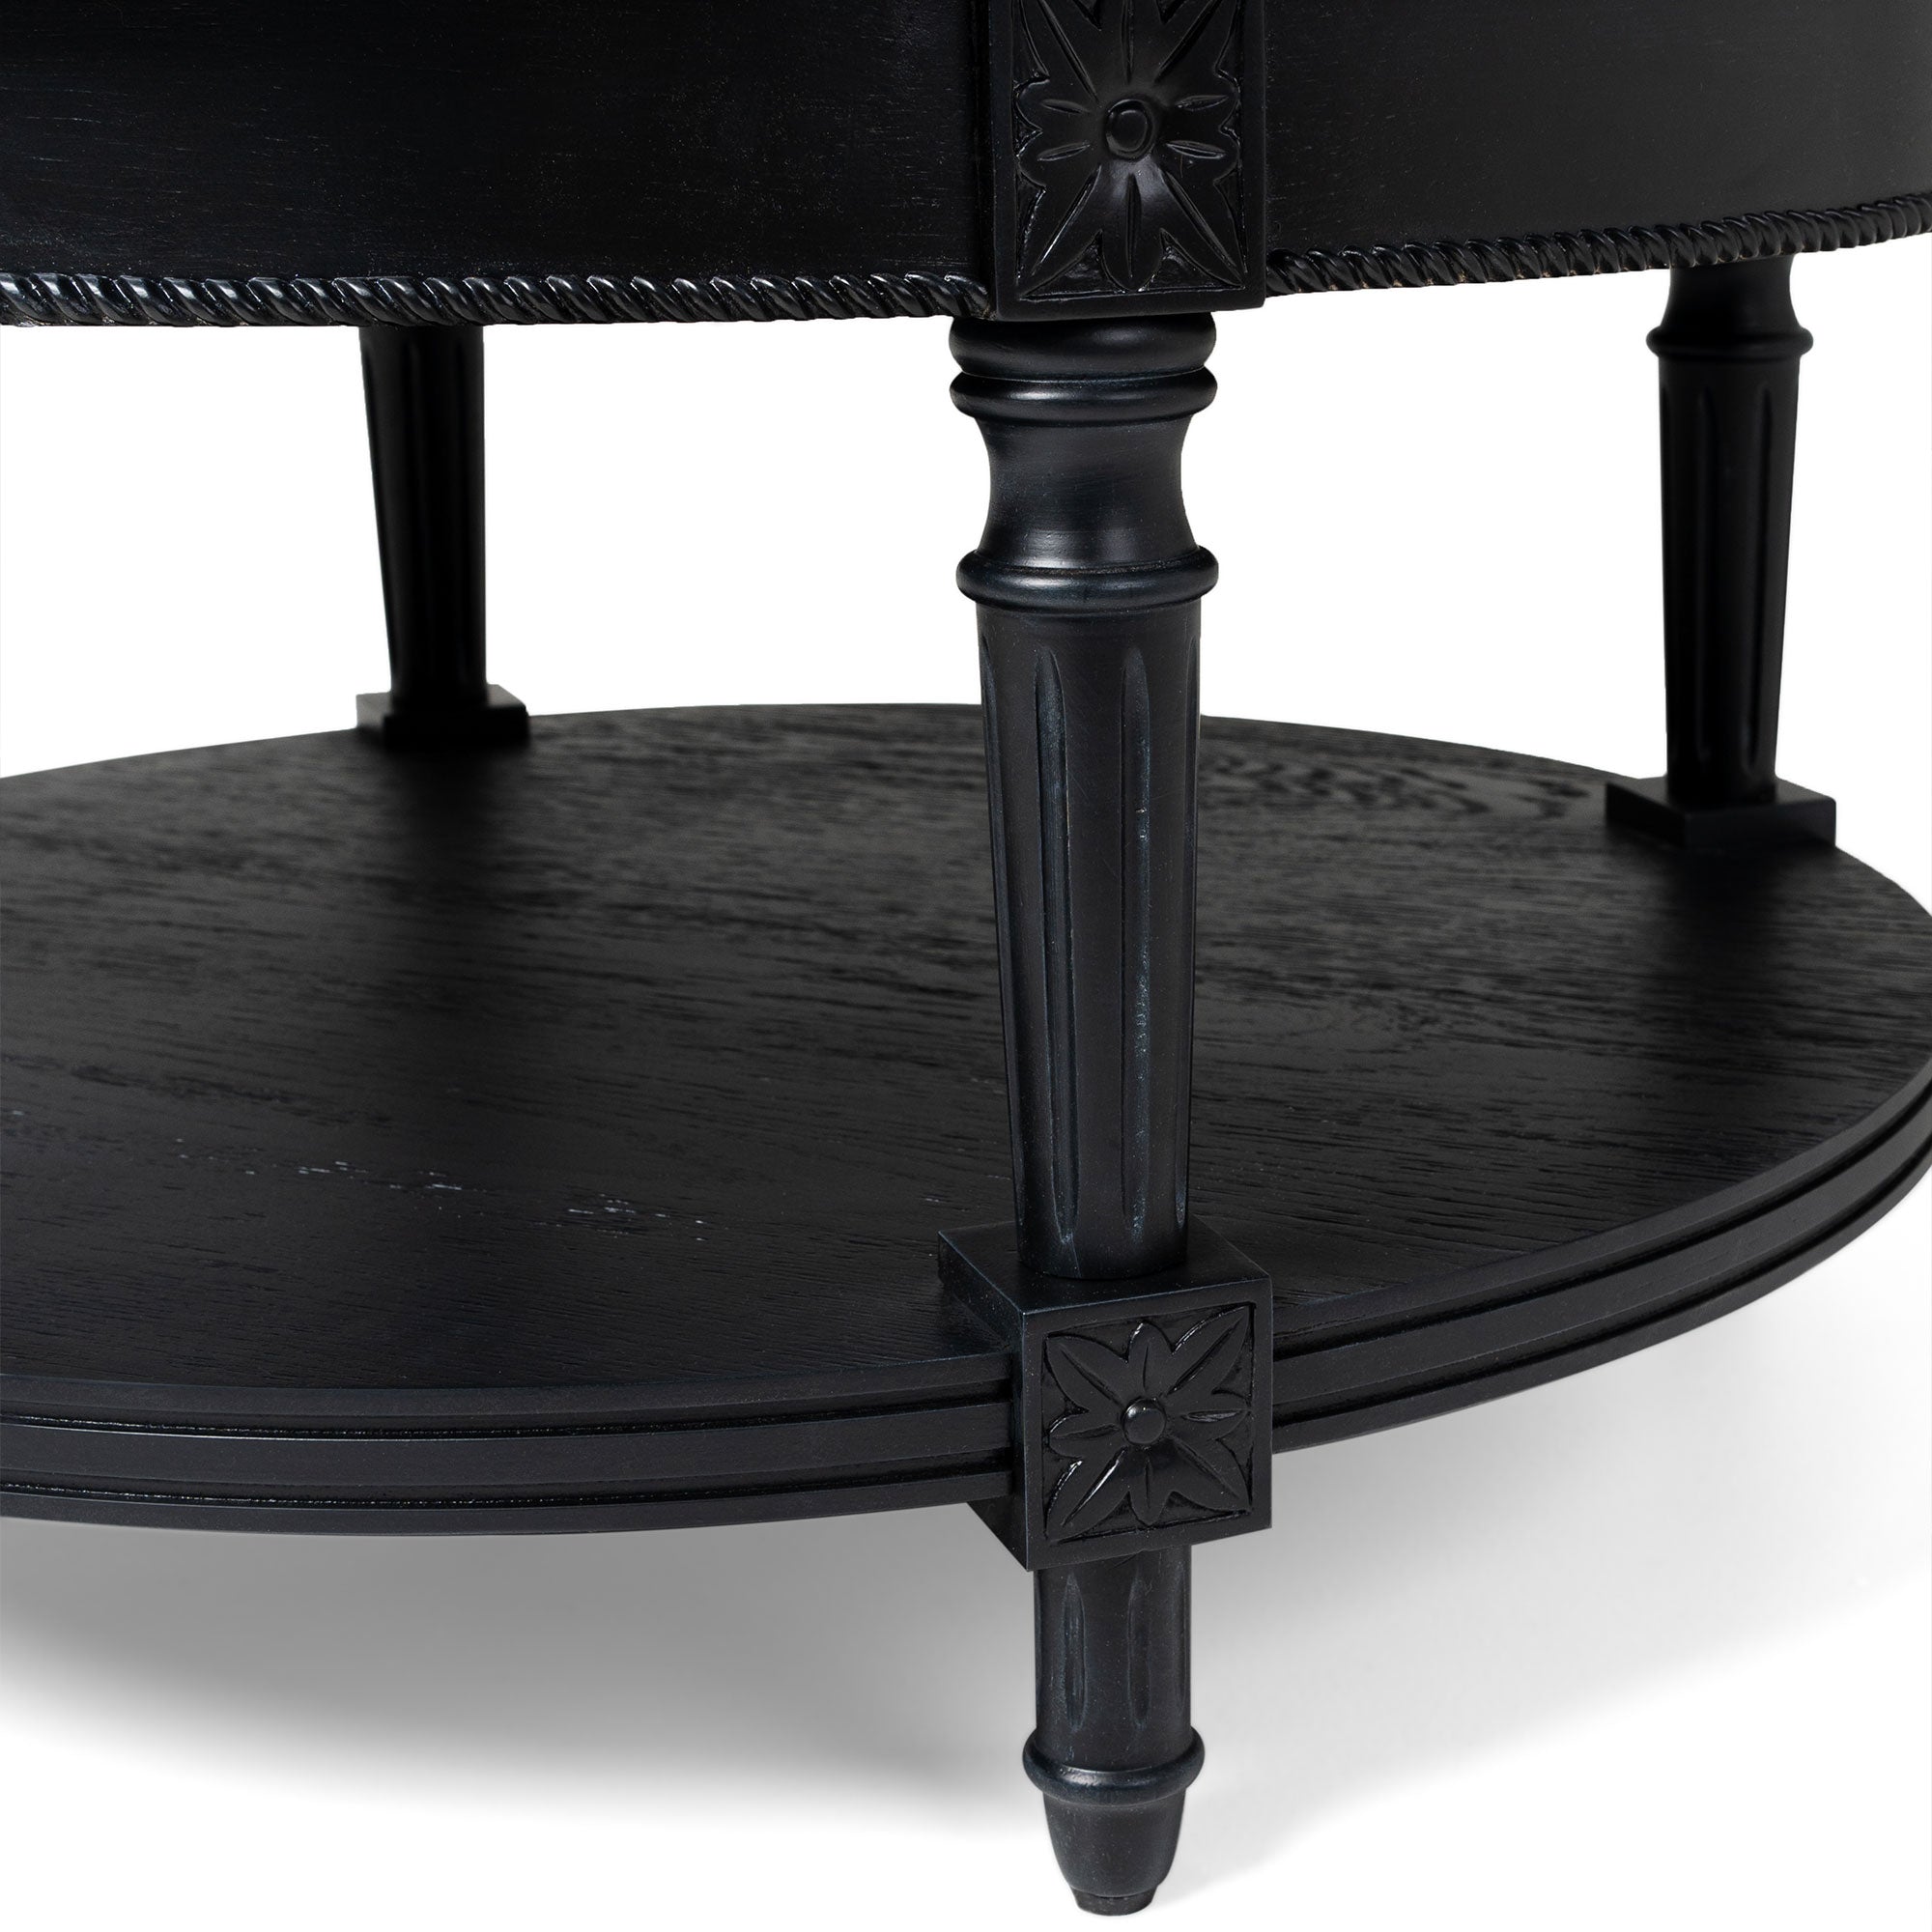 Pullman Traditional Round Wooden Coffee Table in Antiqued Black Finish in Accent Tables by Maven Lane